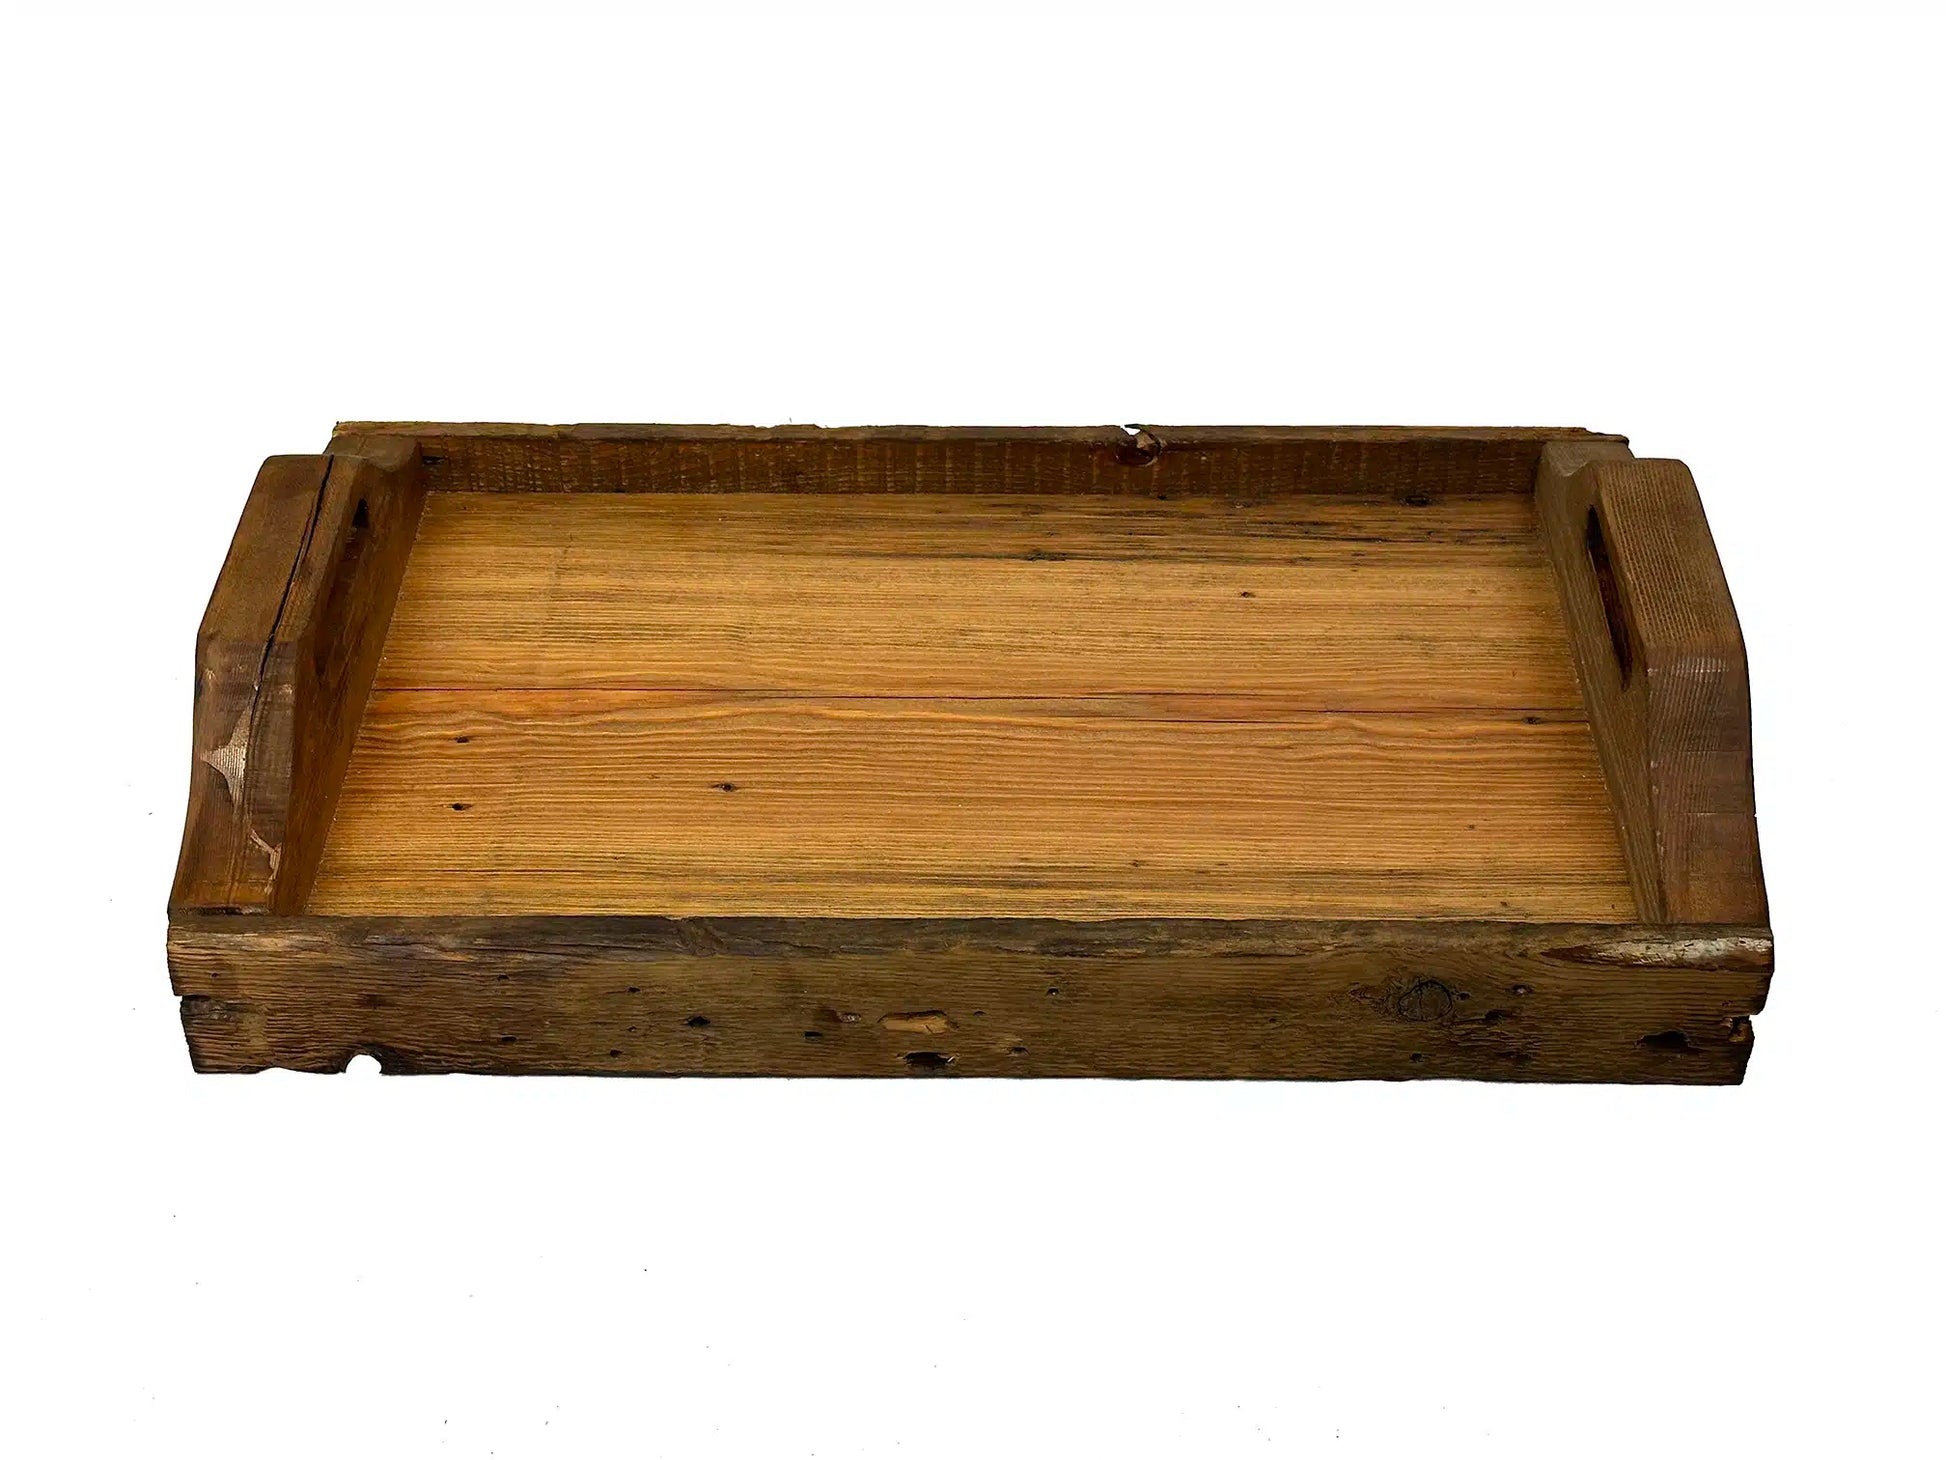 wood serving tray at a wider view showing characteristics displayed in the reclaimed wood used to create the serving tray.